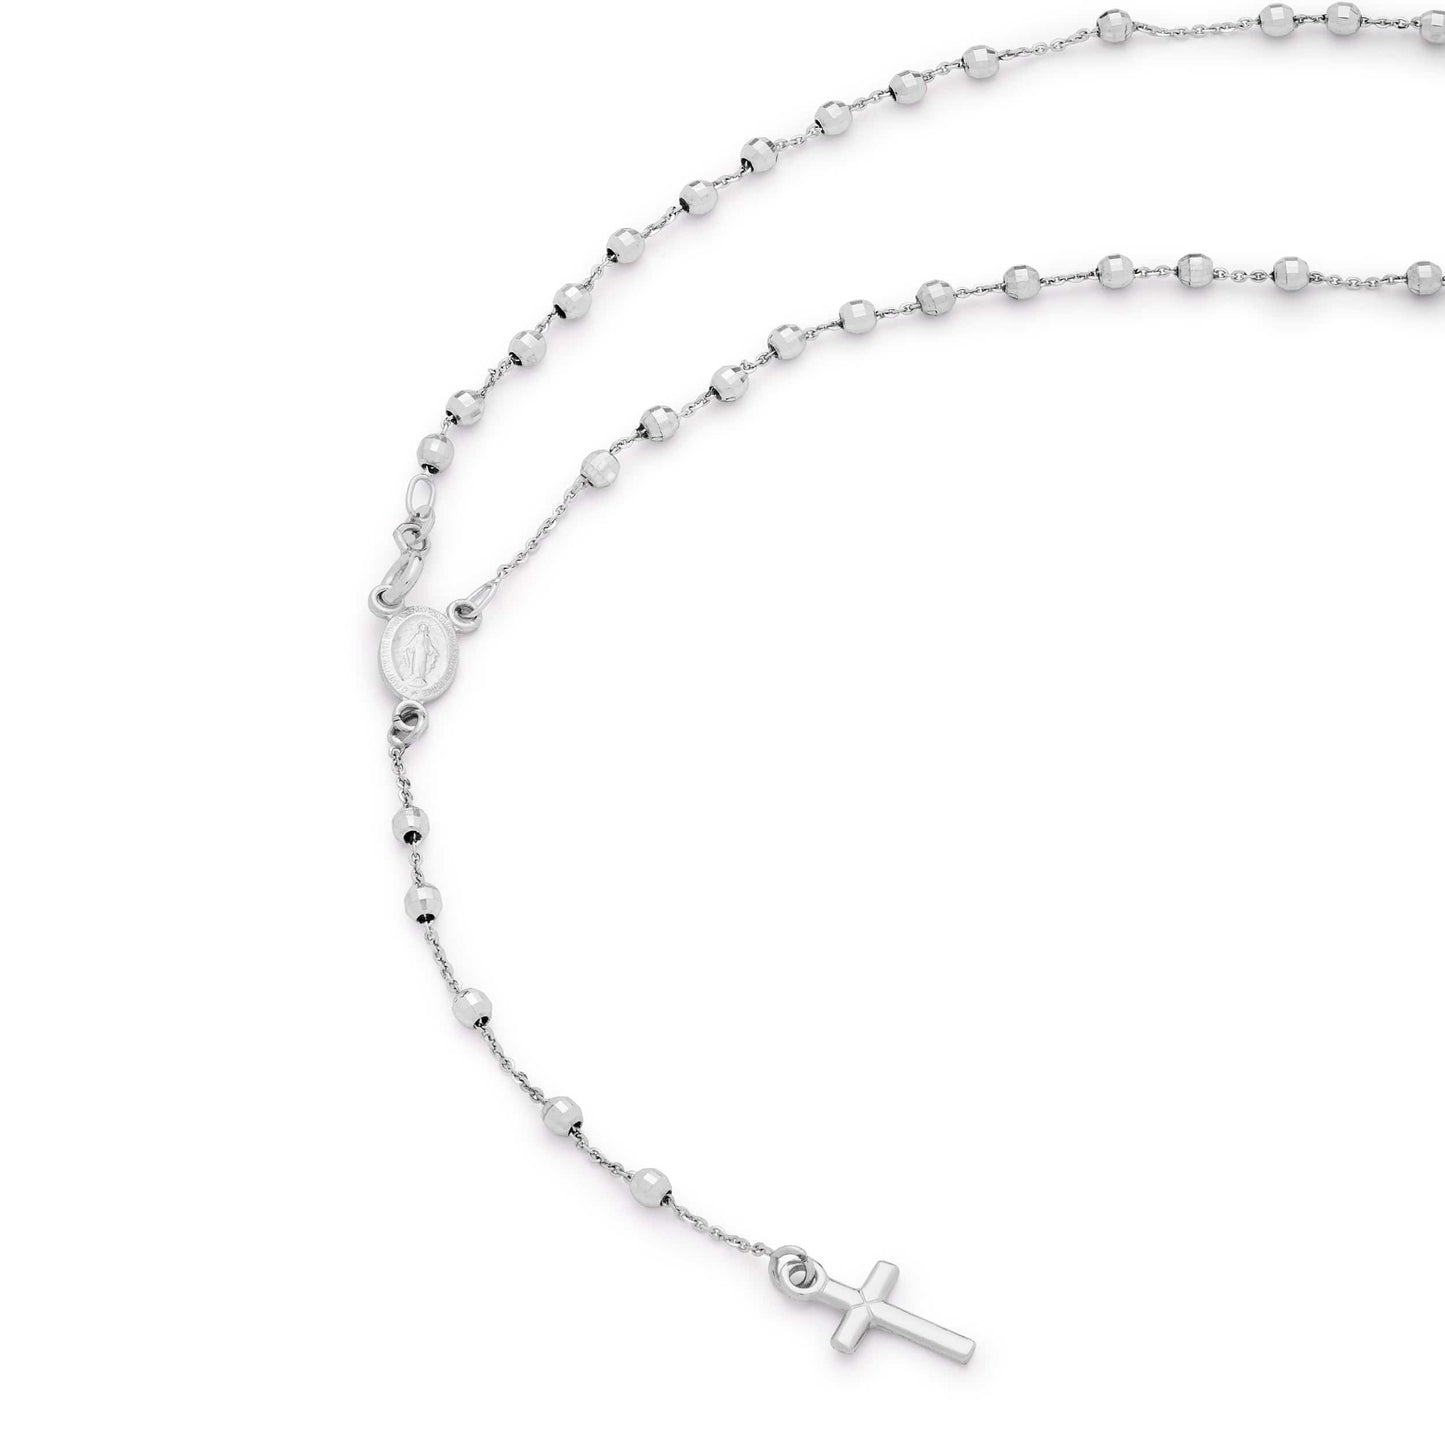 MONDO CATTOLICO Prayer Beads 30.5 cm (12 in) / 3 mm (0.11 in) White Gold Faceted Rosary Beads